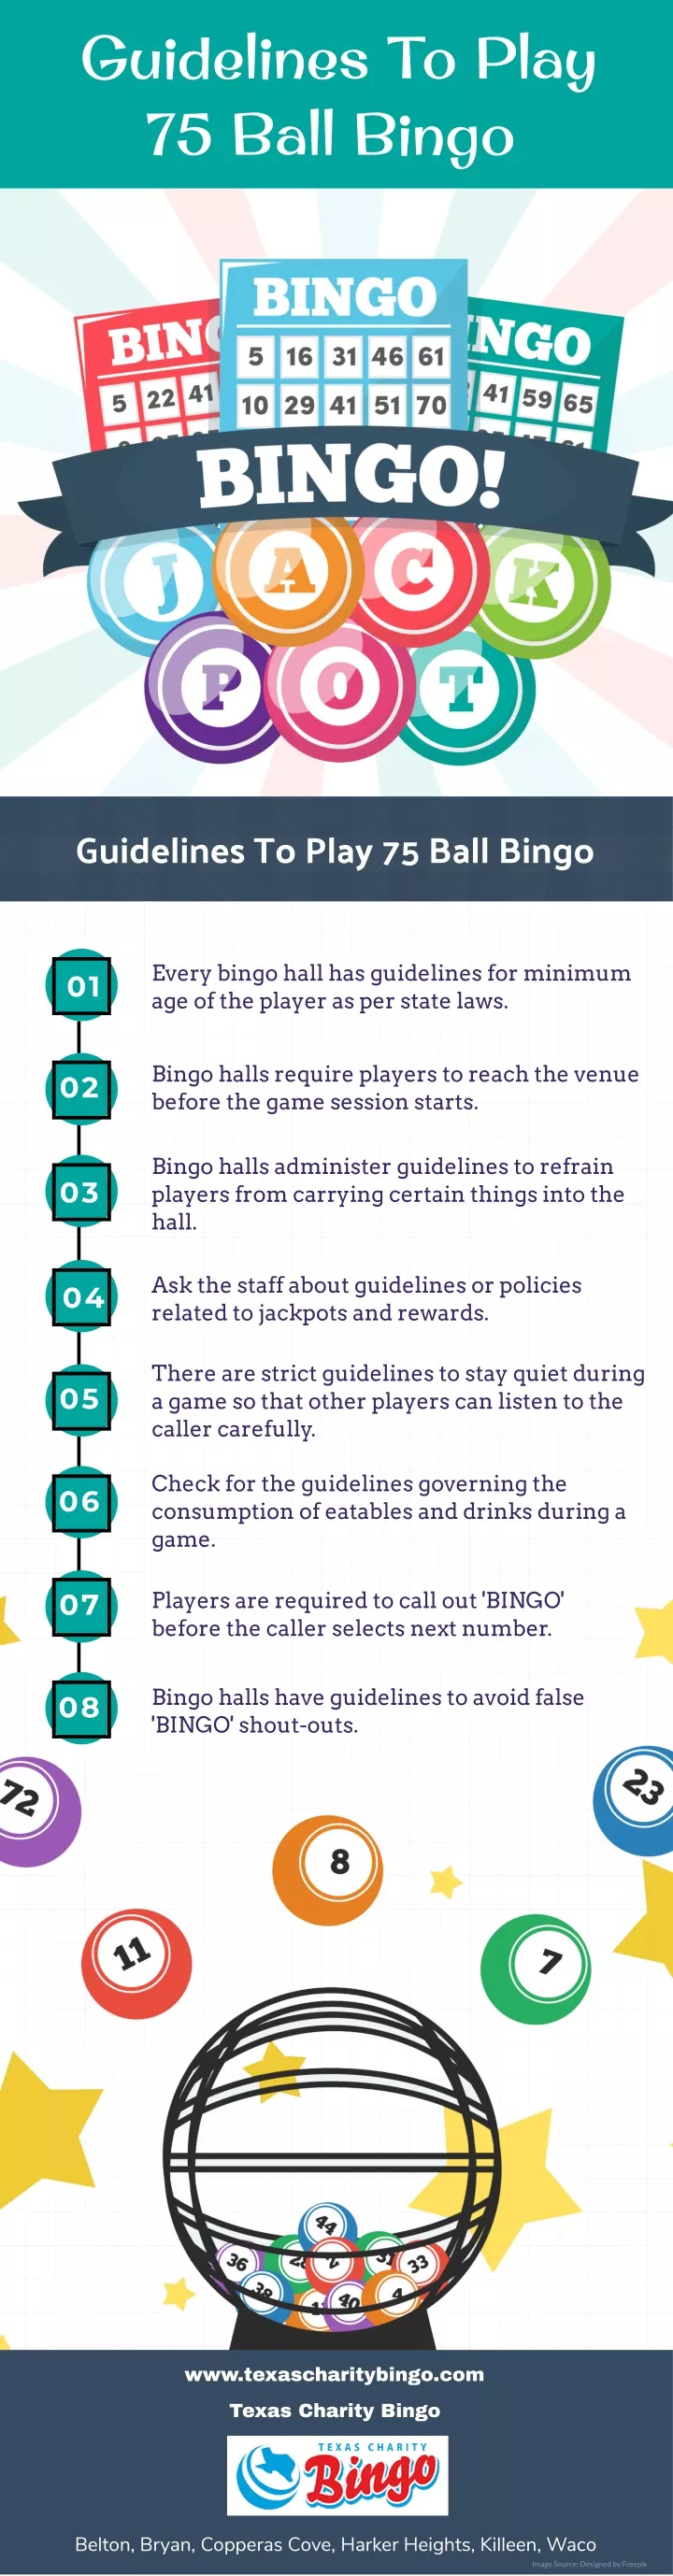 guidelines to play 75 ball bingo